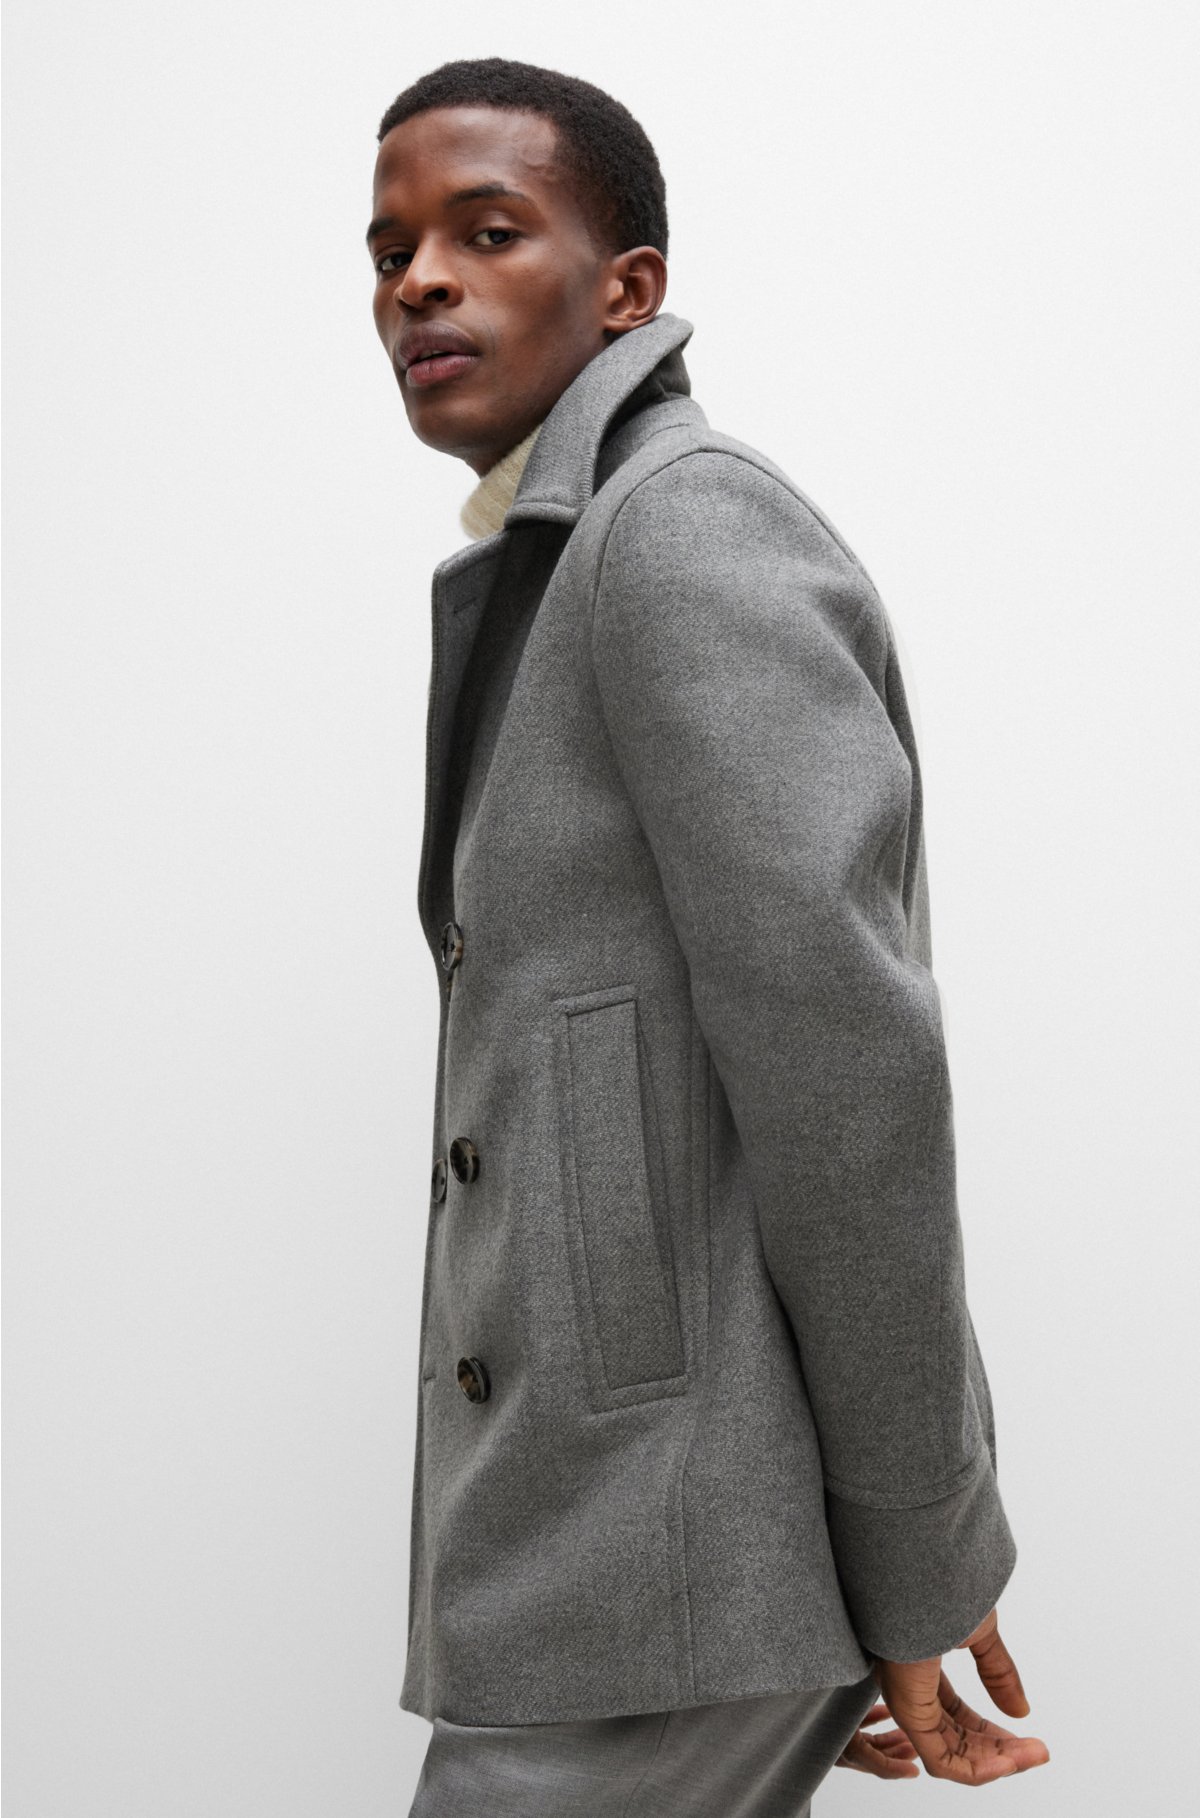 BOSS - Wool-blend slim-fit coat with double-breasted closure